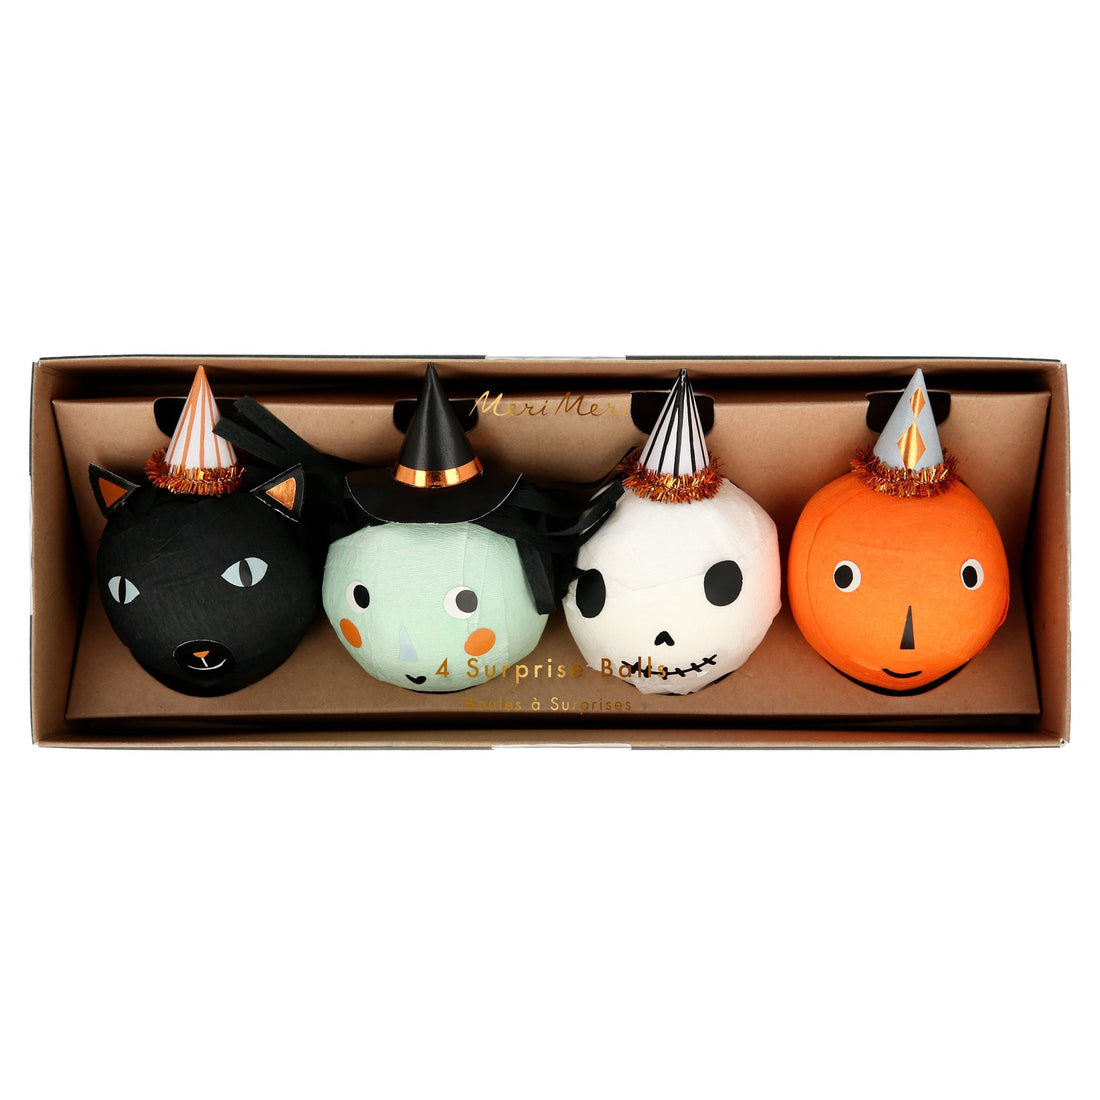 package with a witch, skull, black cat and pumpkin surprise balls, all with charming little hats with copper foil detail